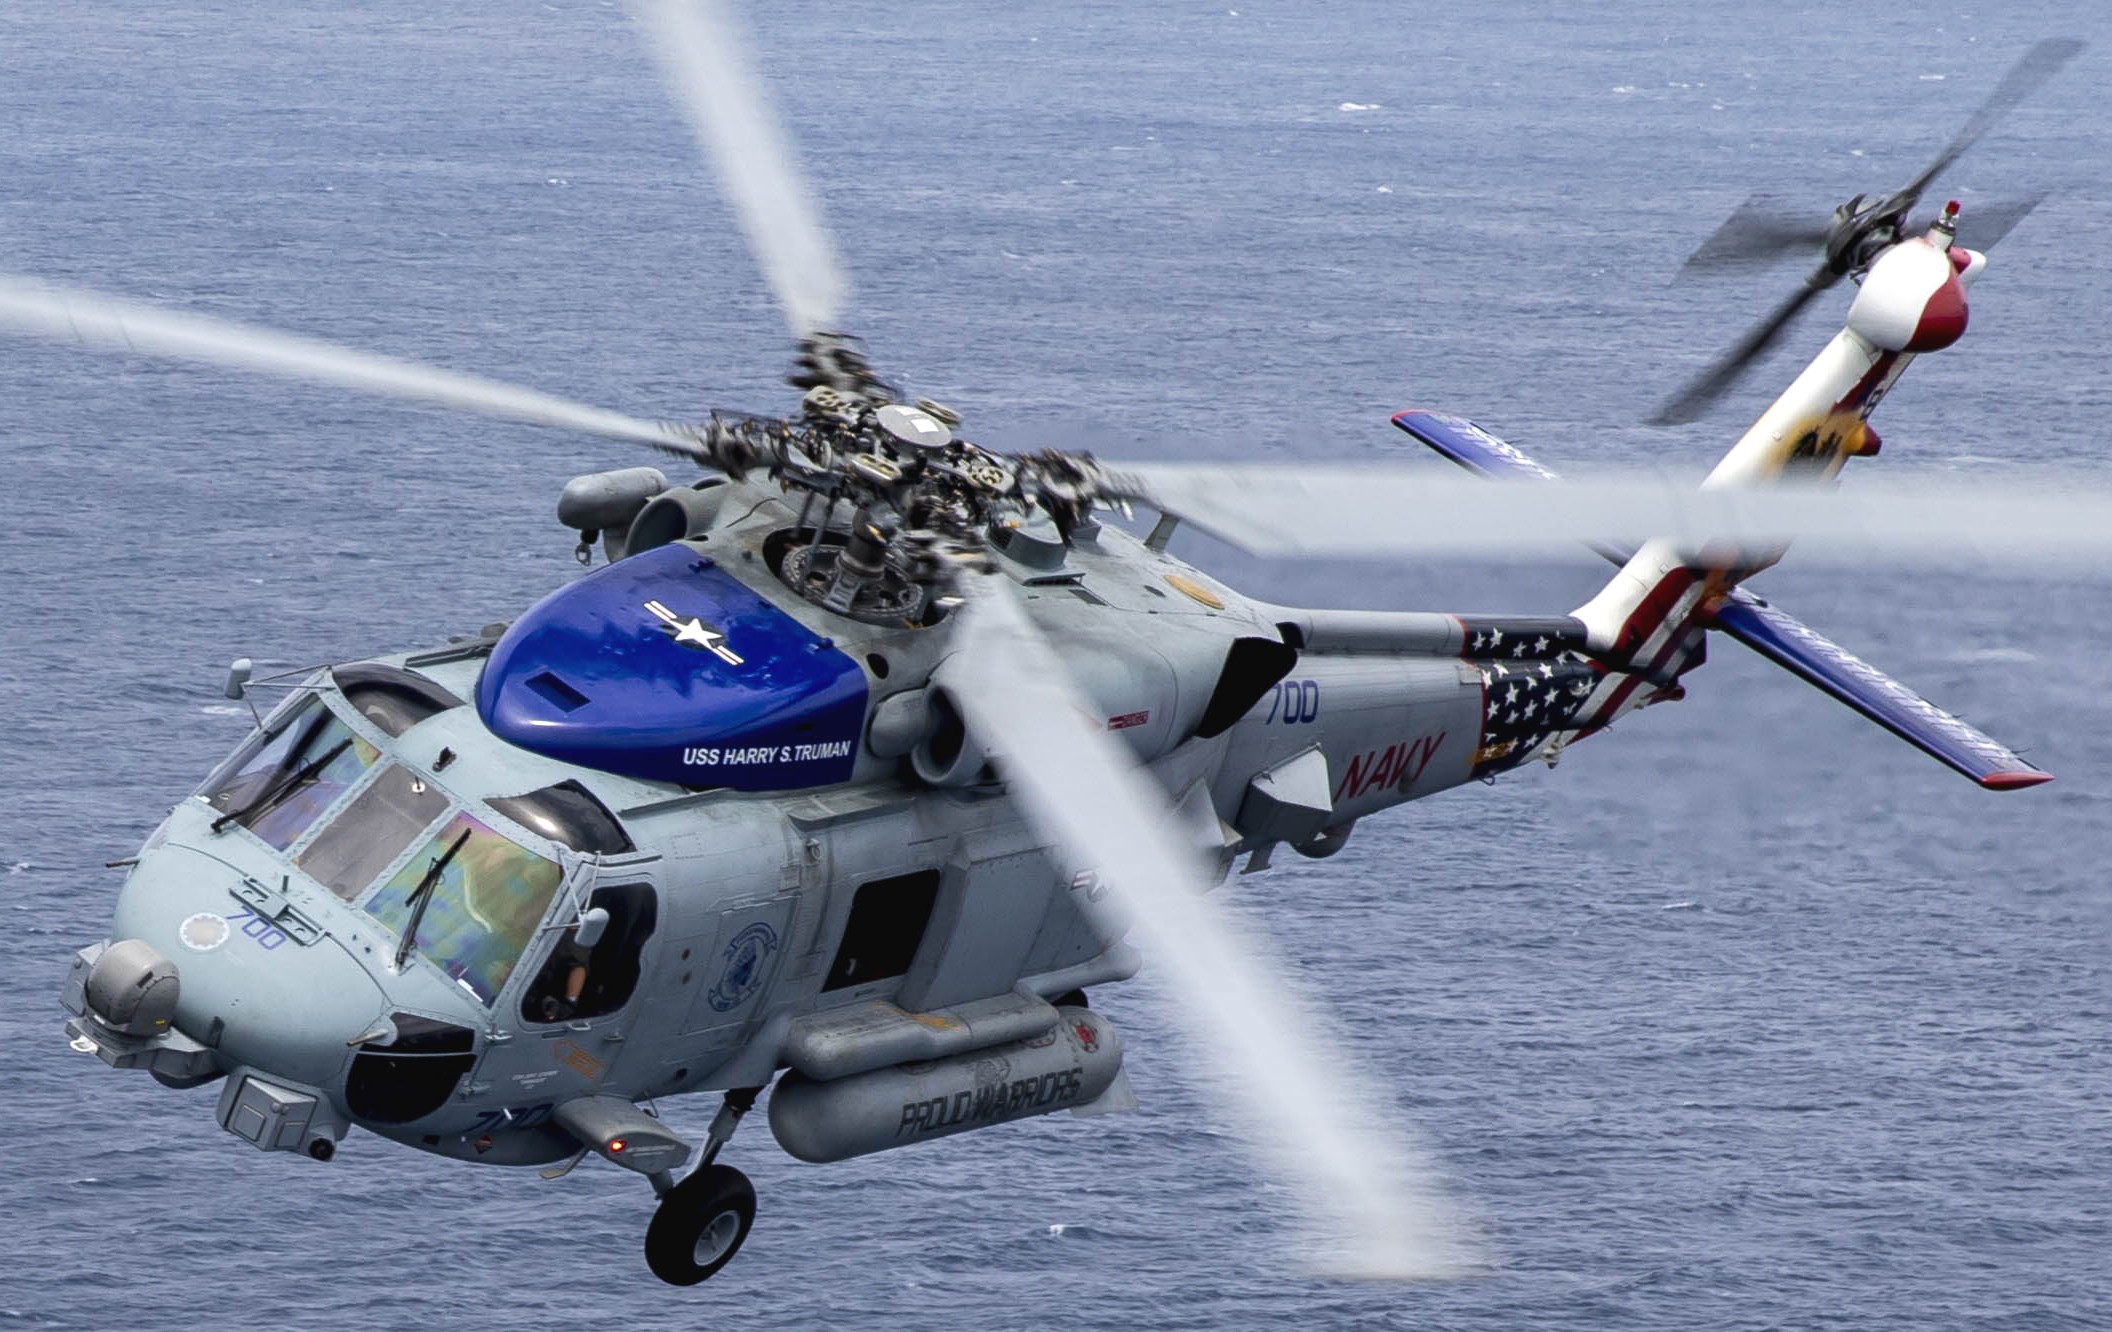 hsm-72 proud warriors helicopter maritime strike squadron us navy mh-60r seahawk special livery 79